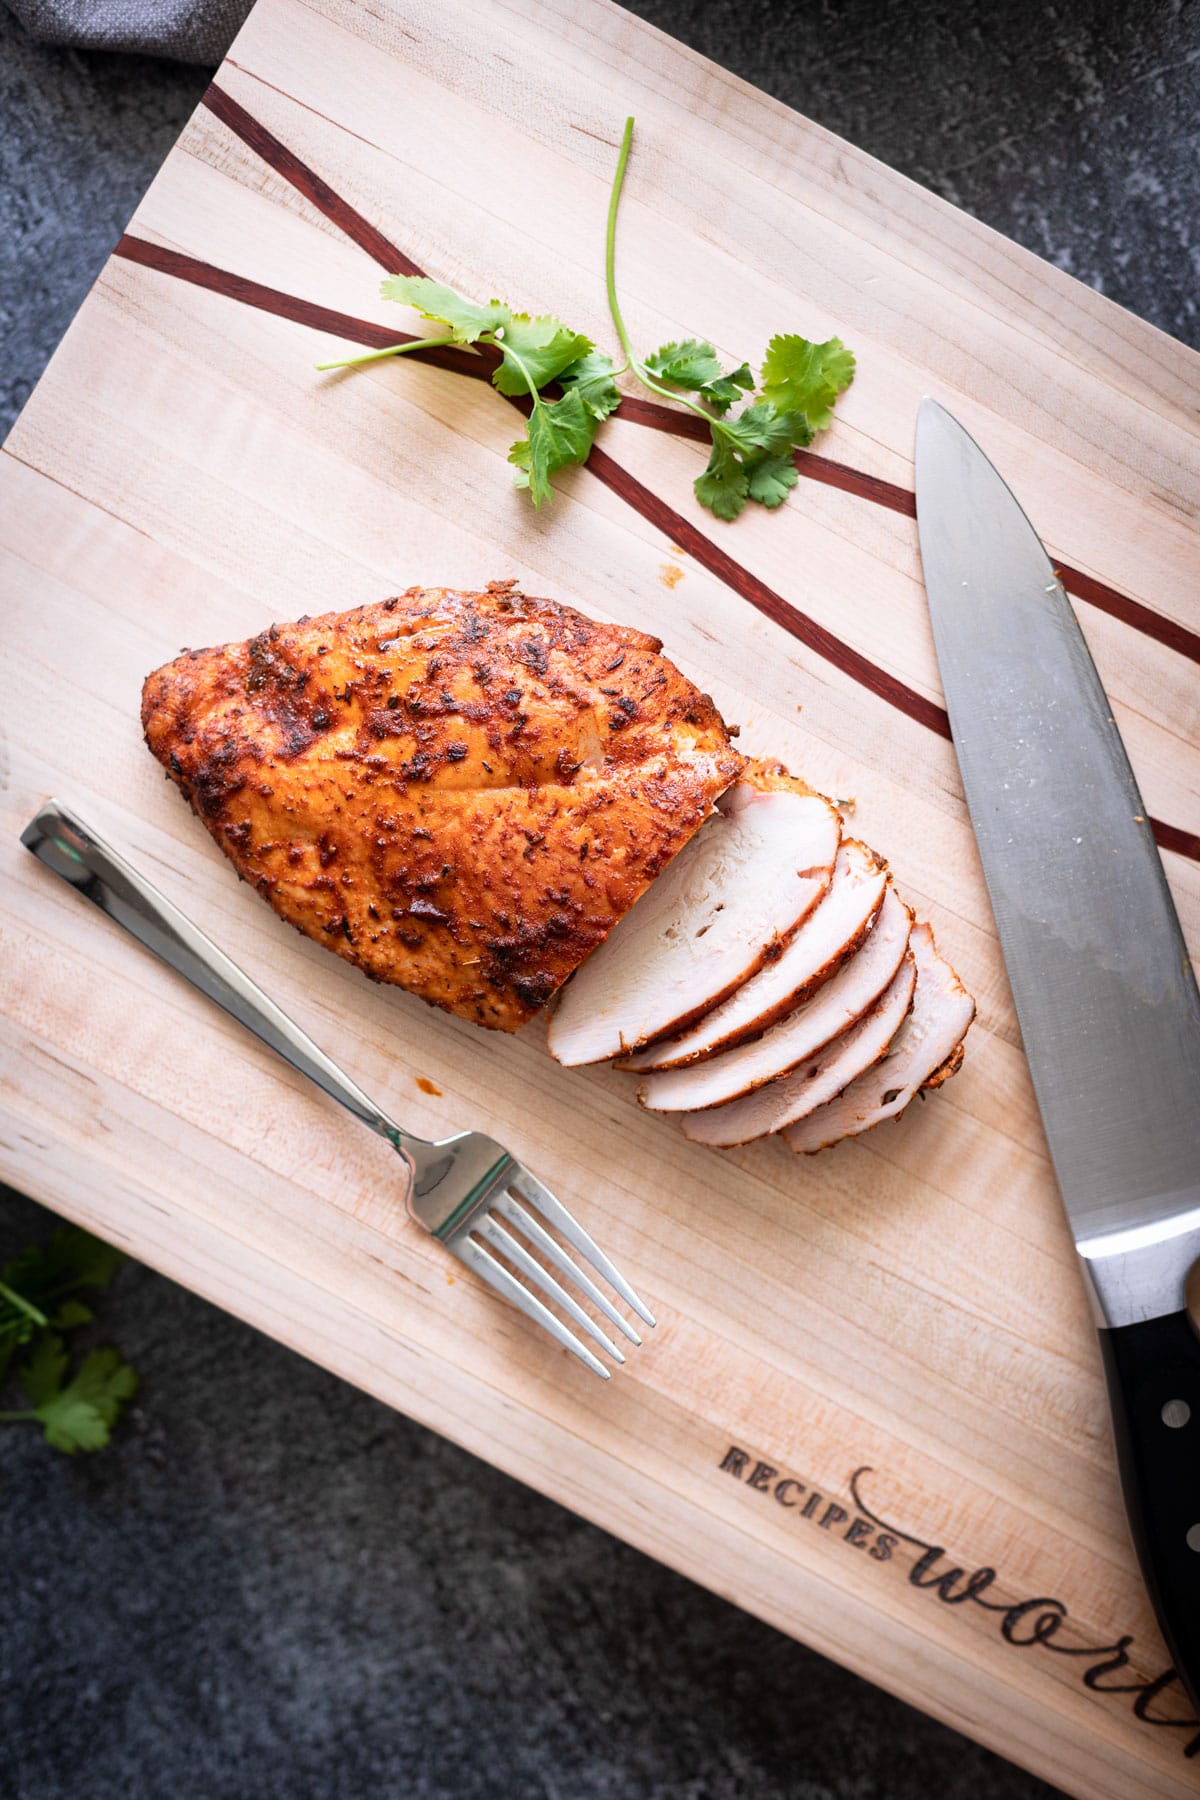 Sliced chicken breast on a cutting board, fork and knife on board.